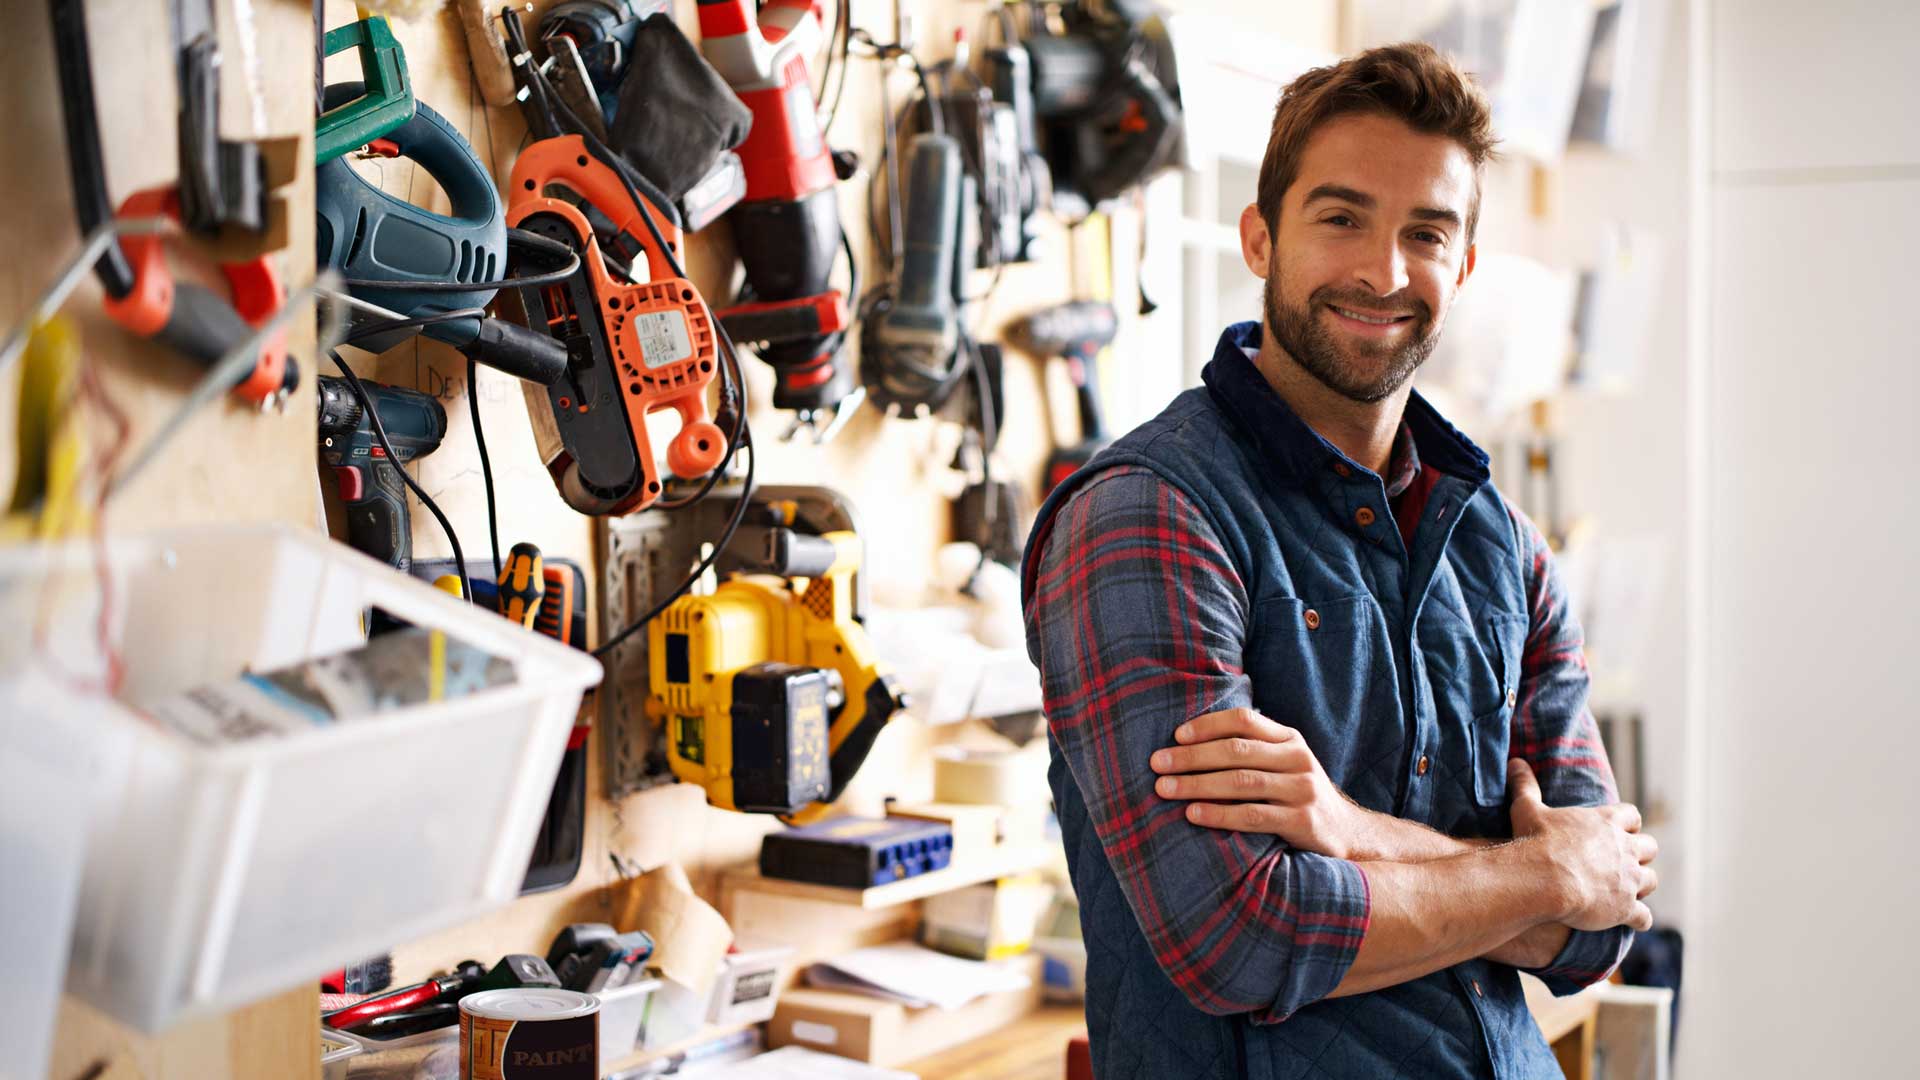 Smiling contractor in front of wall with tools hanging from it